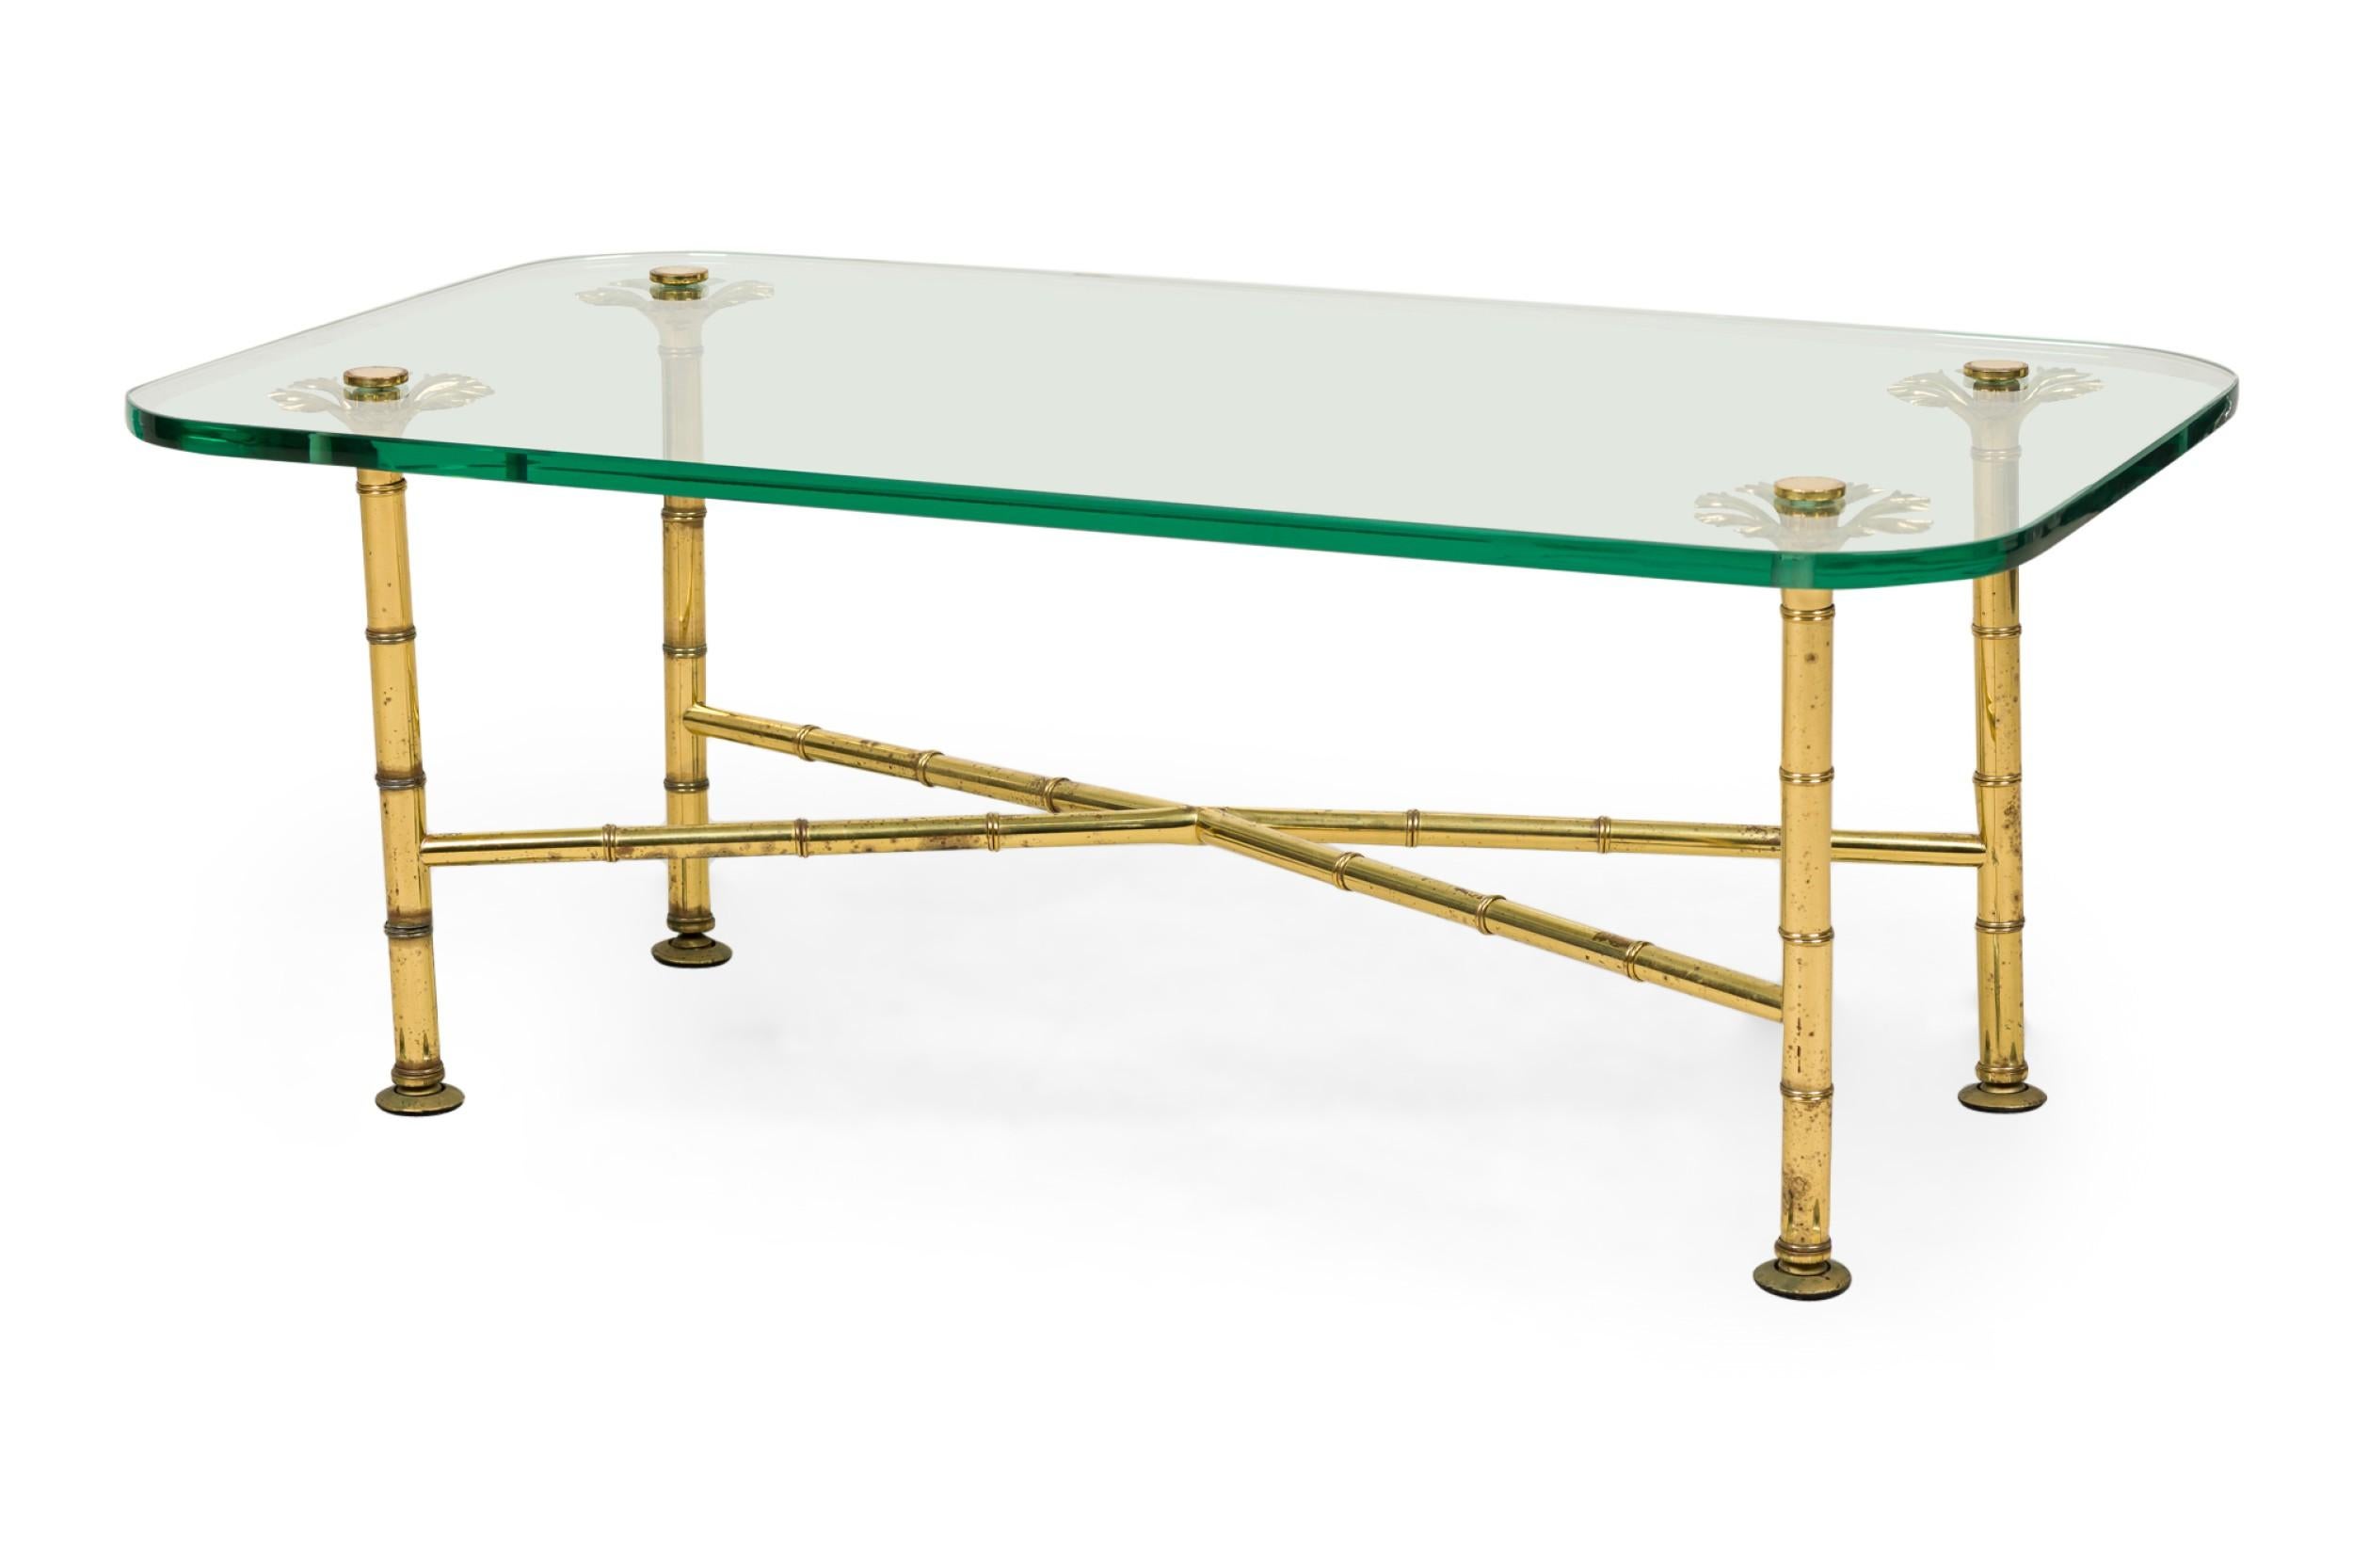 PAIR of Italian Mid-Century low / coffee tables with x-form brass faux bamboo frames with branch-like upper supports that hold rectangular clear glass tops with rounded corners. (FONTANA ARTE) (PRICED AS PAIR)
 

 Minor tarnishing to brass frames.
